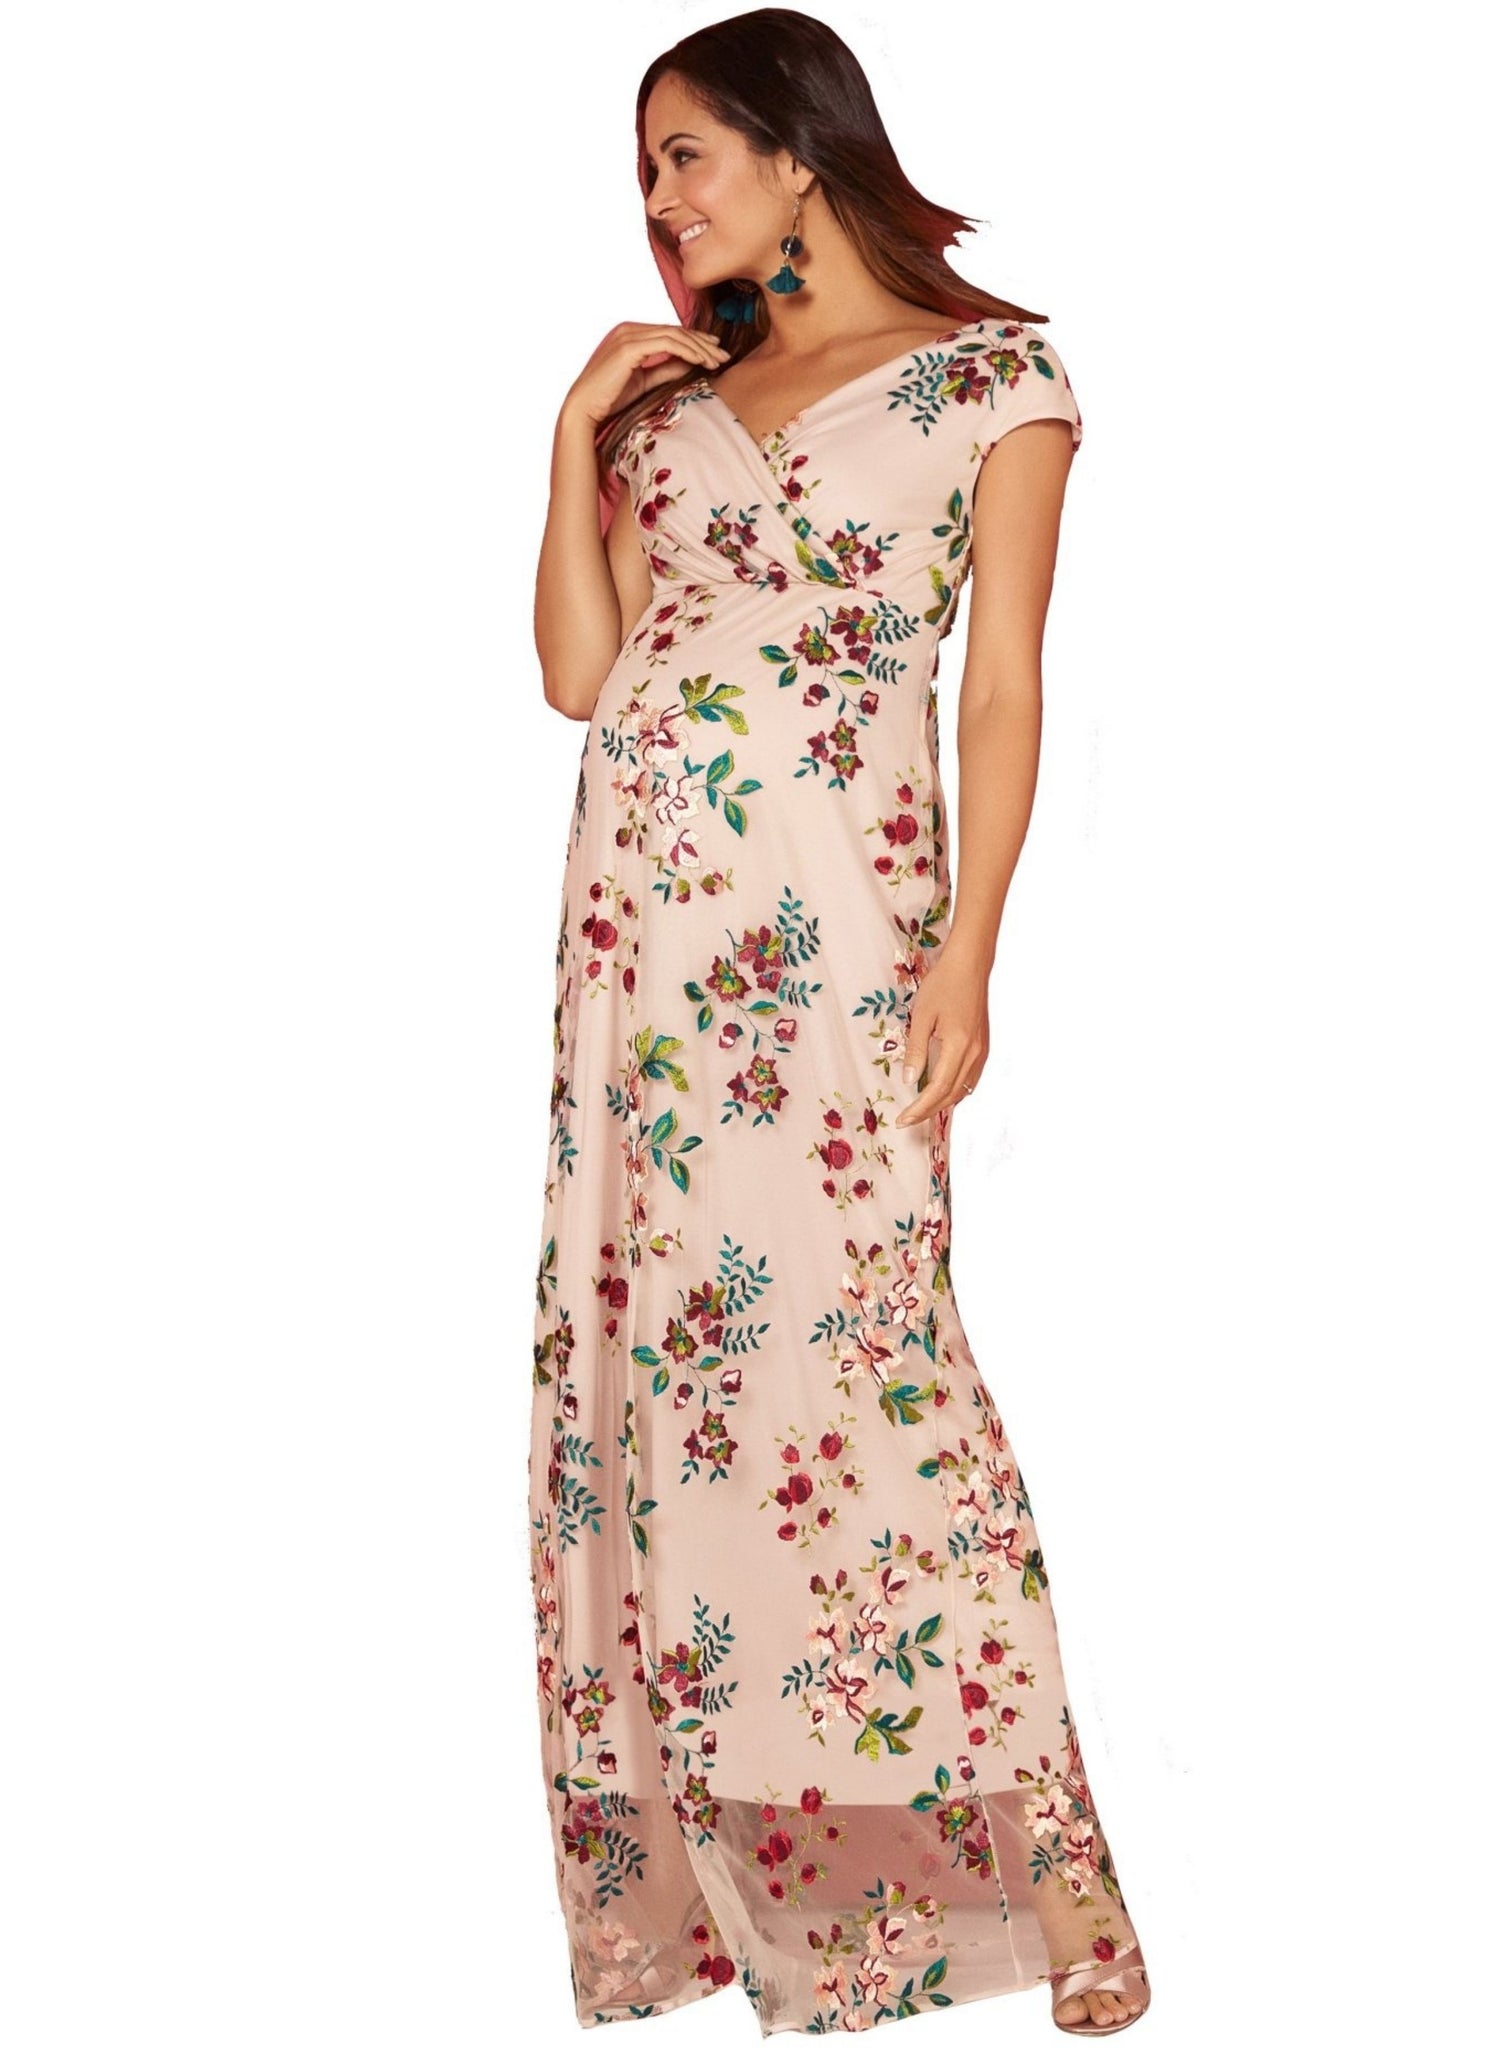 Bailey Maternity Gown - Blushing Blooms